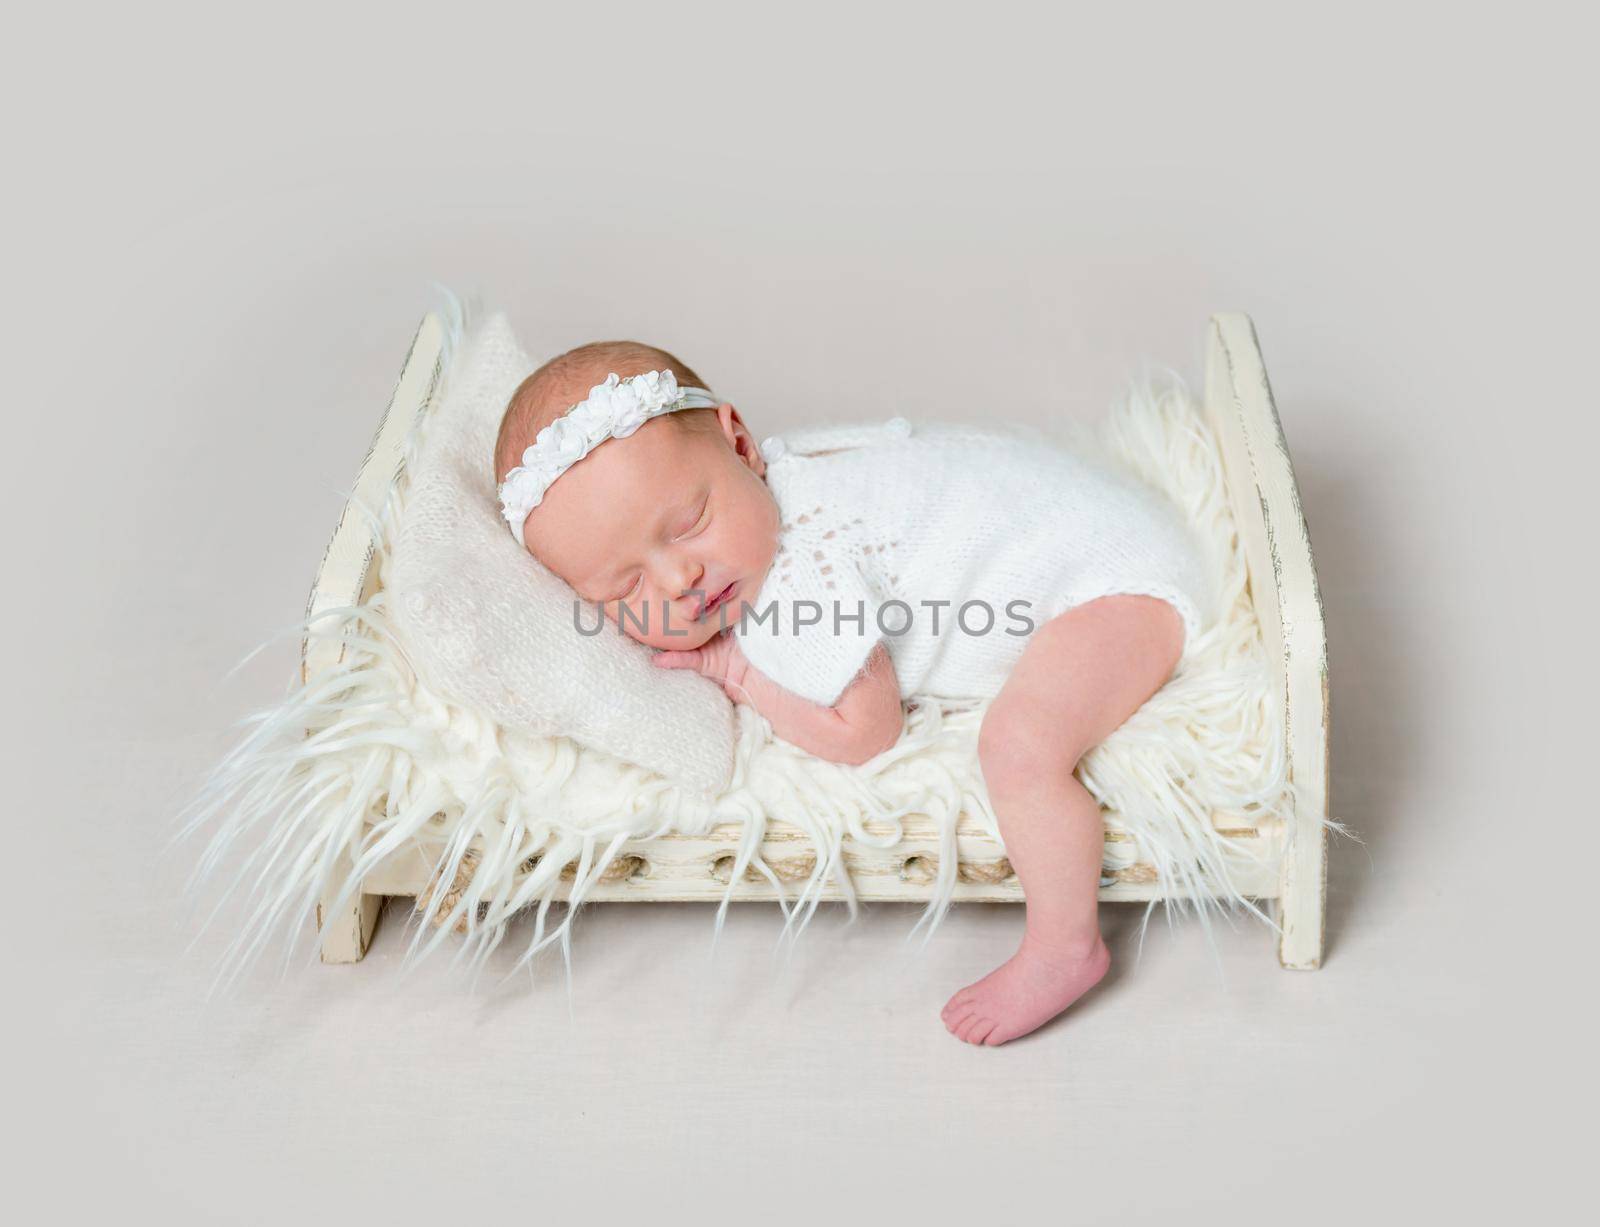 Lovely newborn baby girl sleeping on small crib lowered her small leg on the floor. Little child girl in white outfit with flowery headband